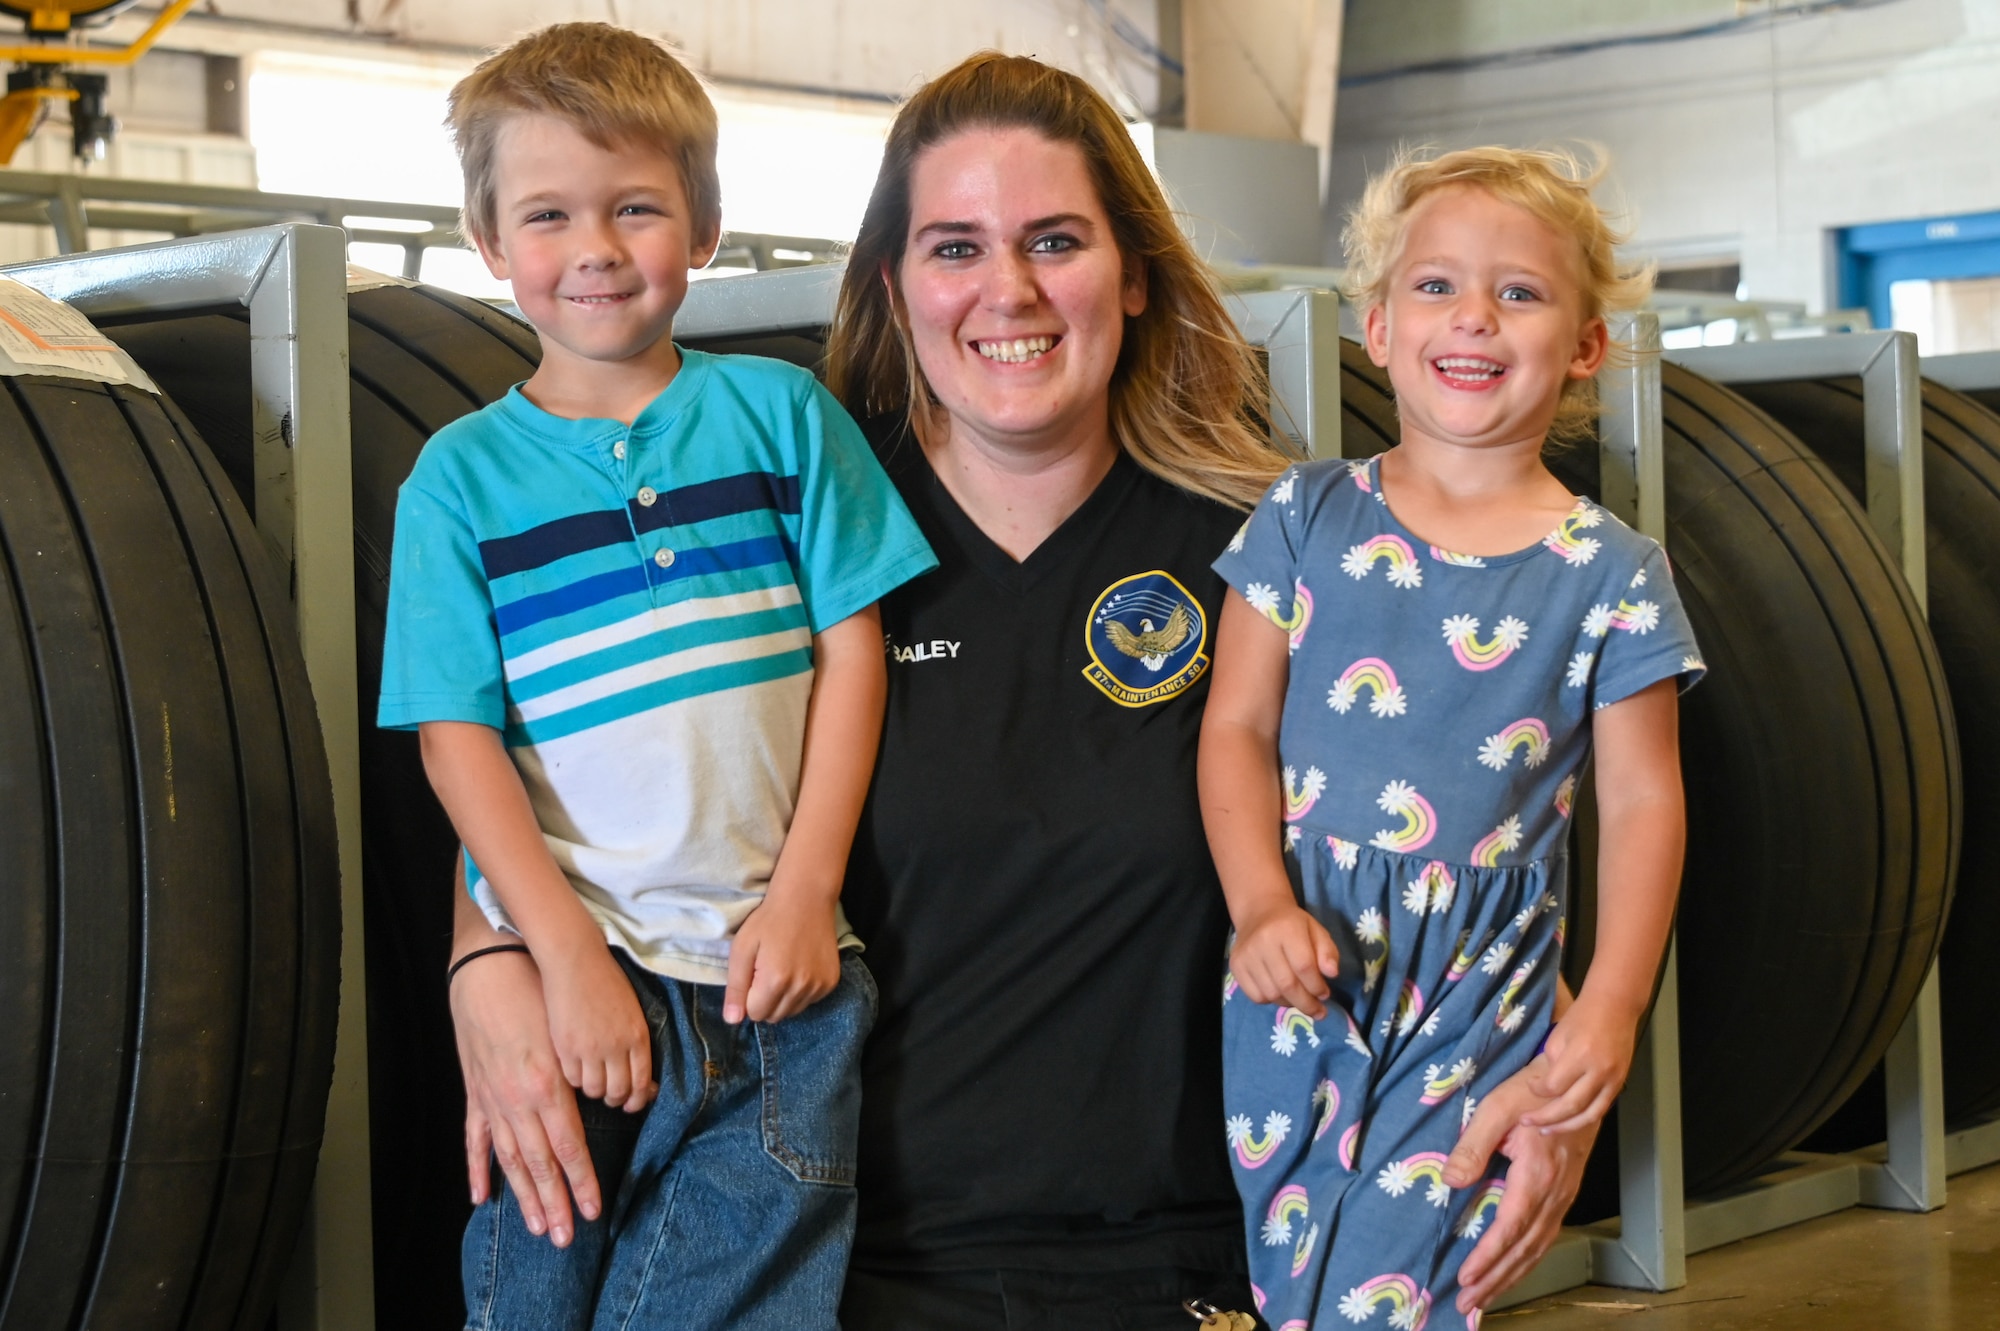 Julie Waldroop, 97th Maintenance Squadron aircraft technician, poses for a photo with her children, Trey and Allie, at Altus Air Force Base, Oklahoma, May 10, 2023. The Department of Defense employs more than 700,000 civilians. (U.S. Air Force photo by Senior Airman Kayla Christenson)